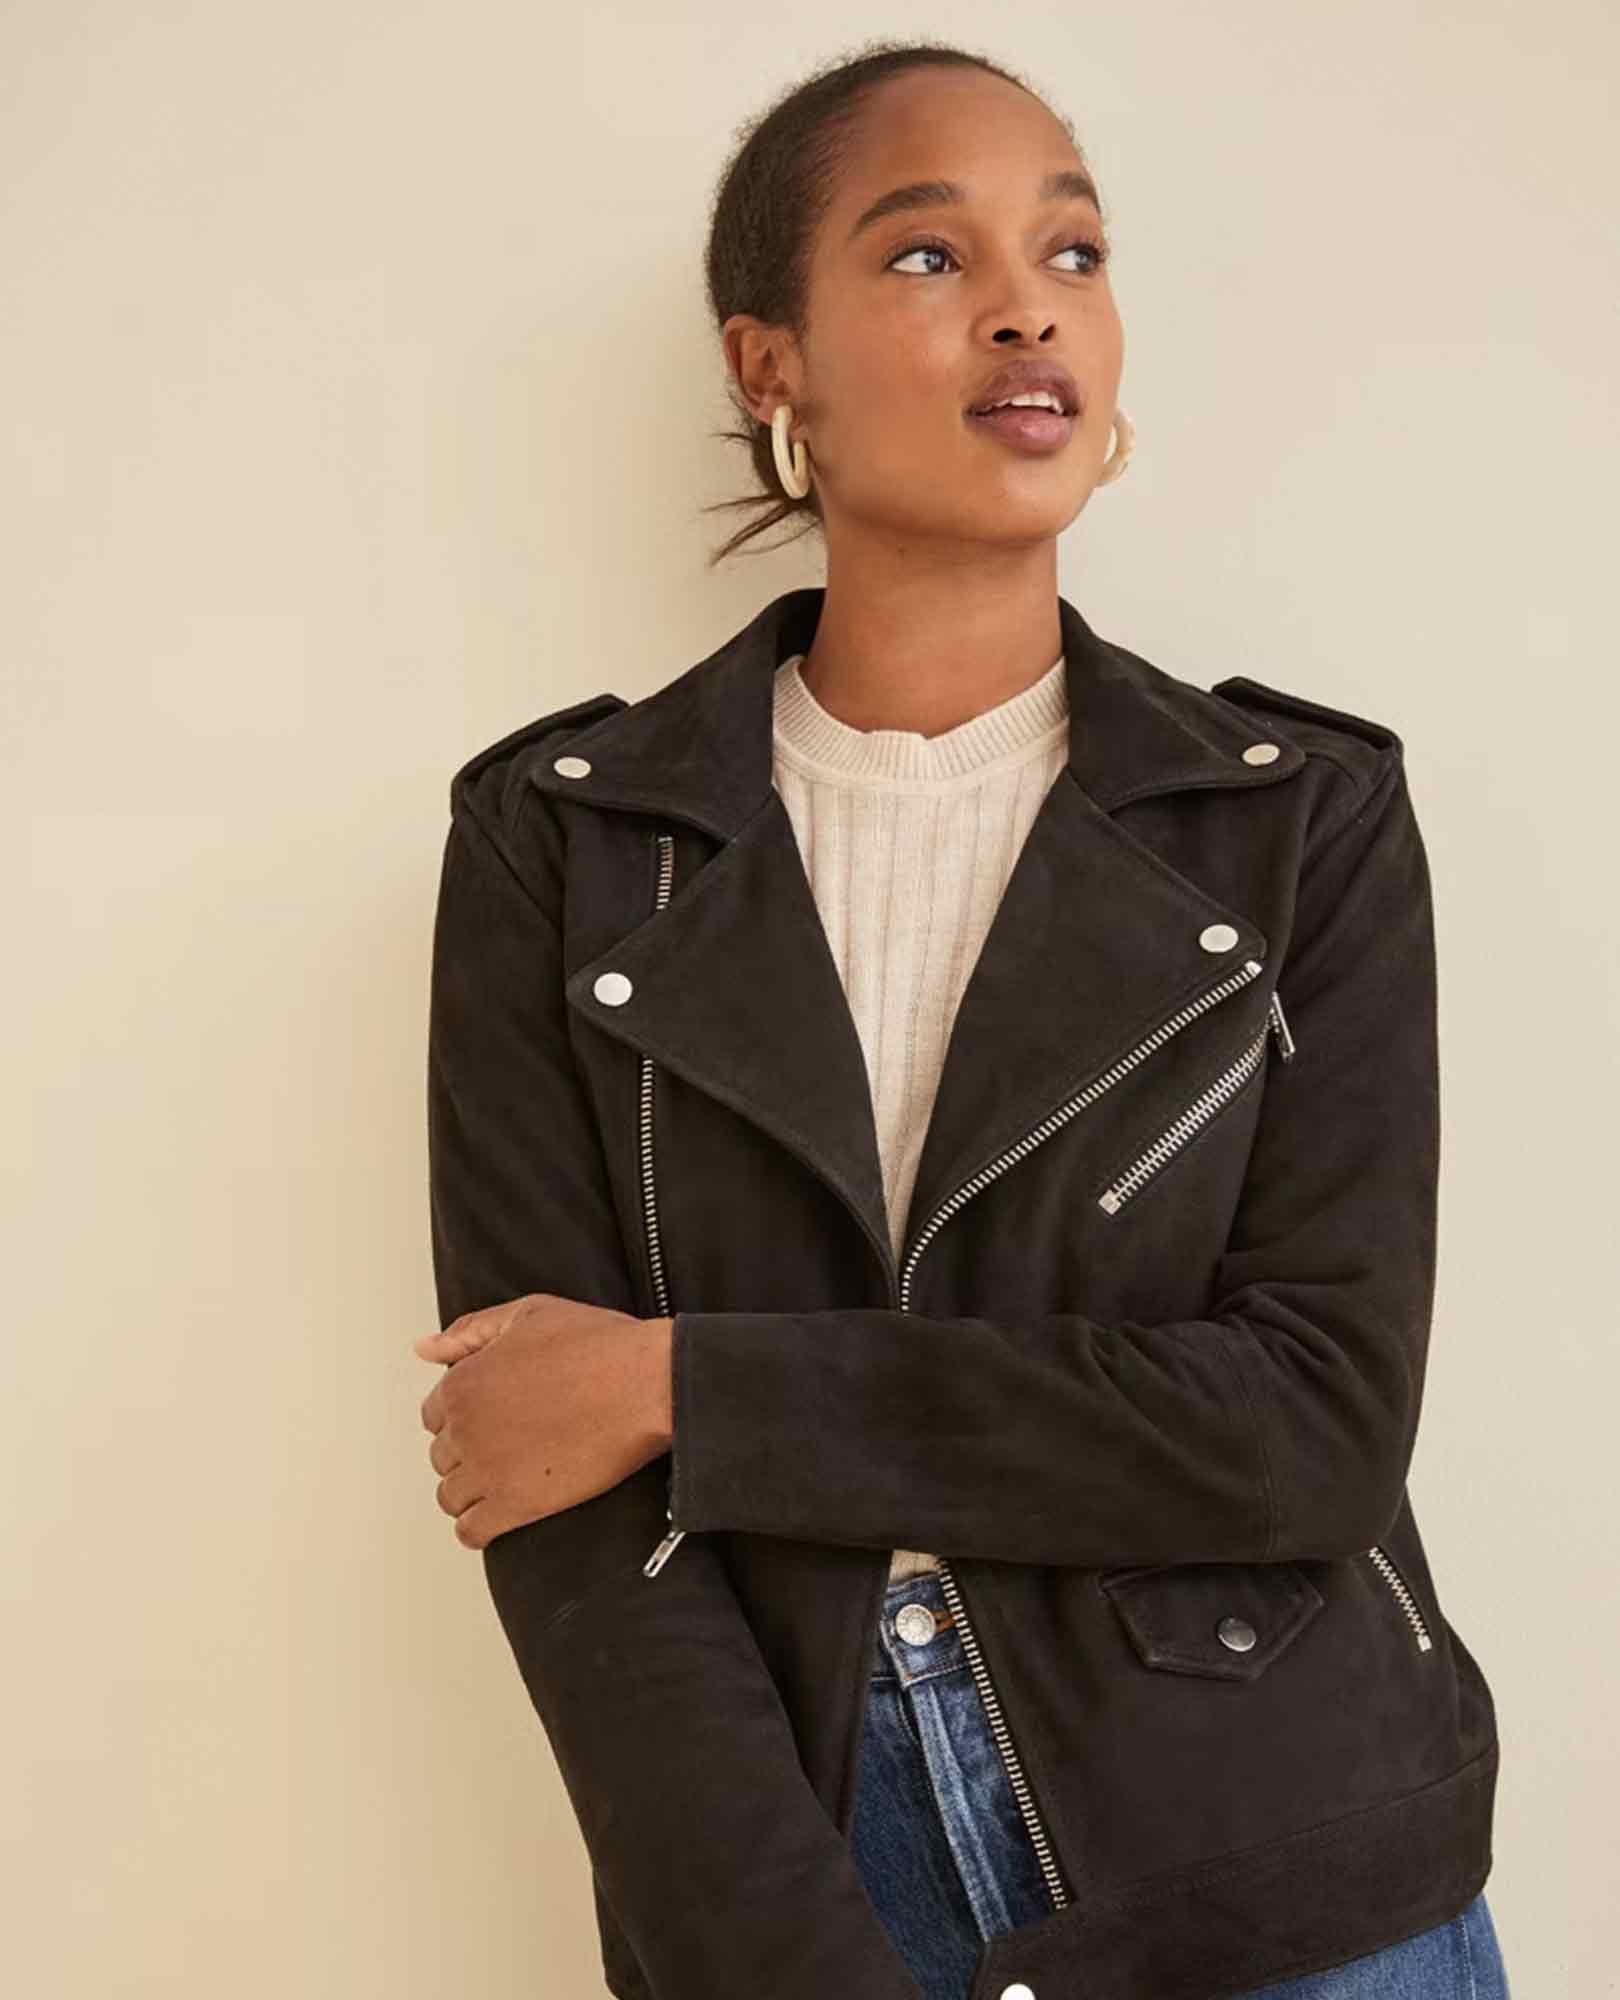 Sparkpick features Amour Vert Deadwood River Suede Jacket in sustainable fashion